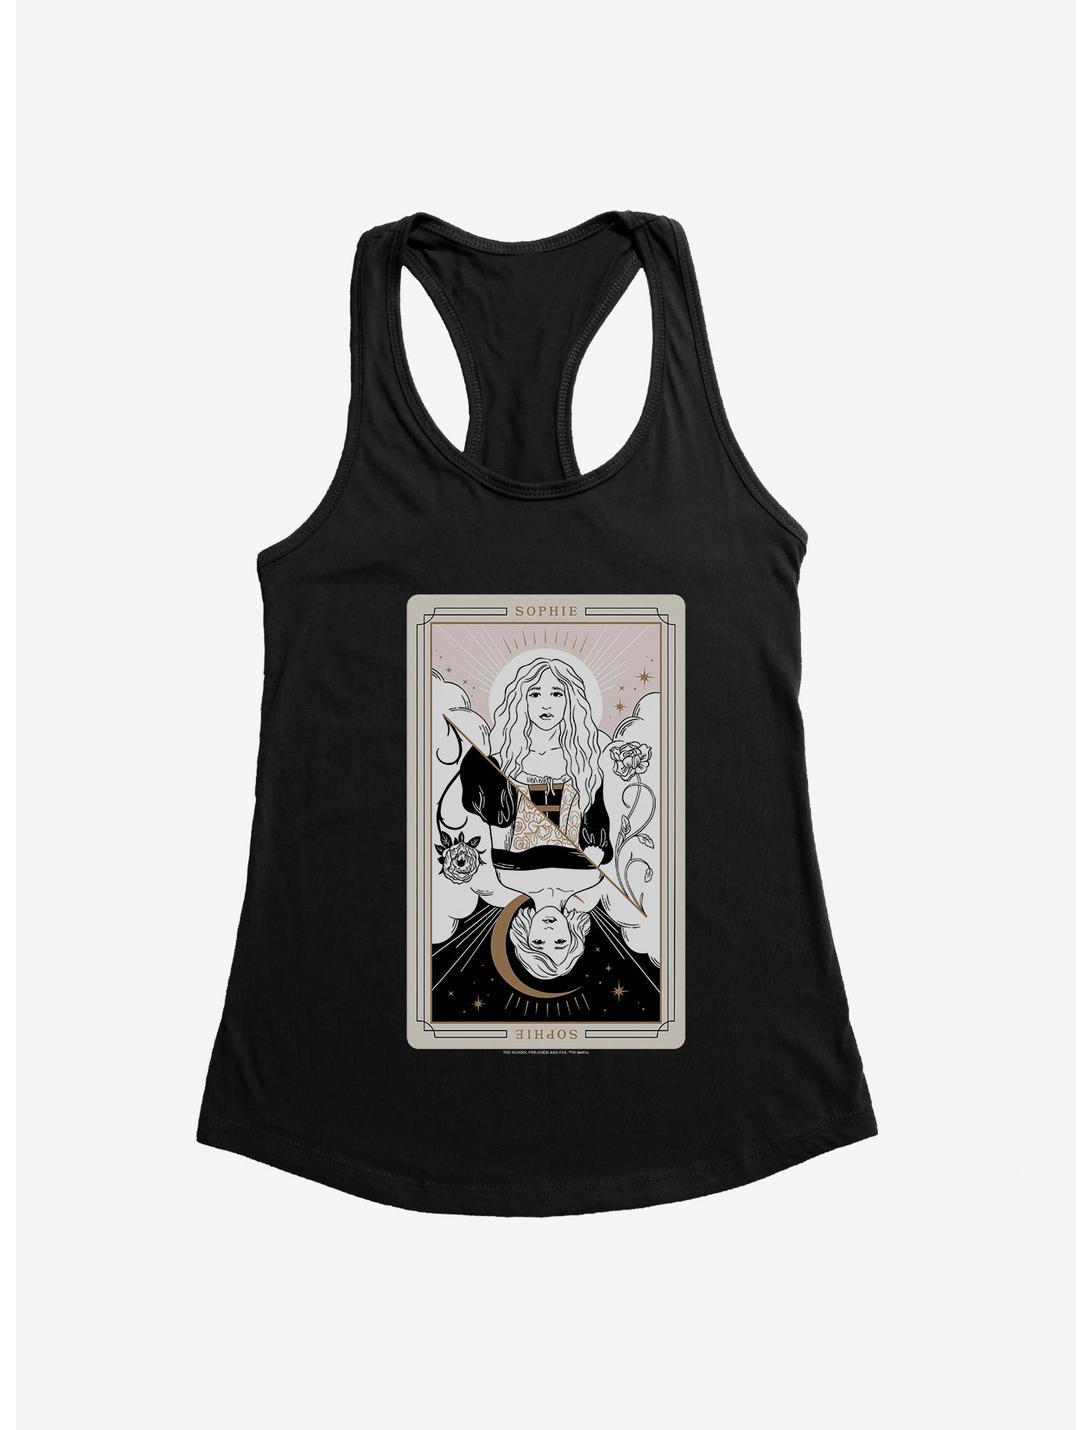 The School For Good And Evil Sophie Tarot Card Girls Tank, BLACK, hi-res